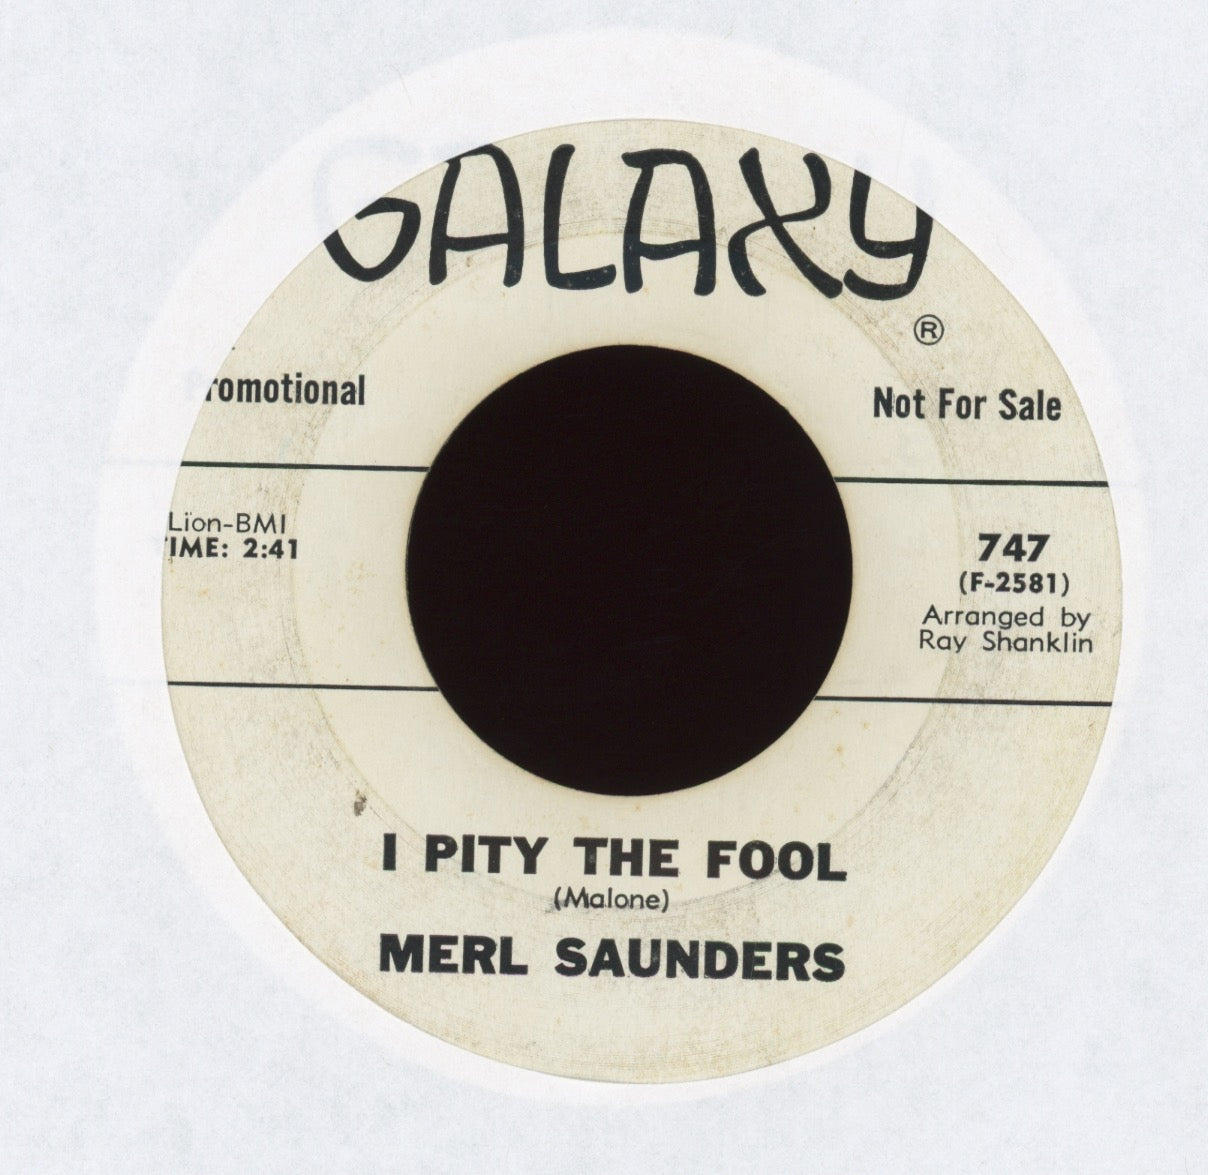 Merl Saunders - Tighten Up on Galaxy Promo Mod Soul 45